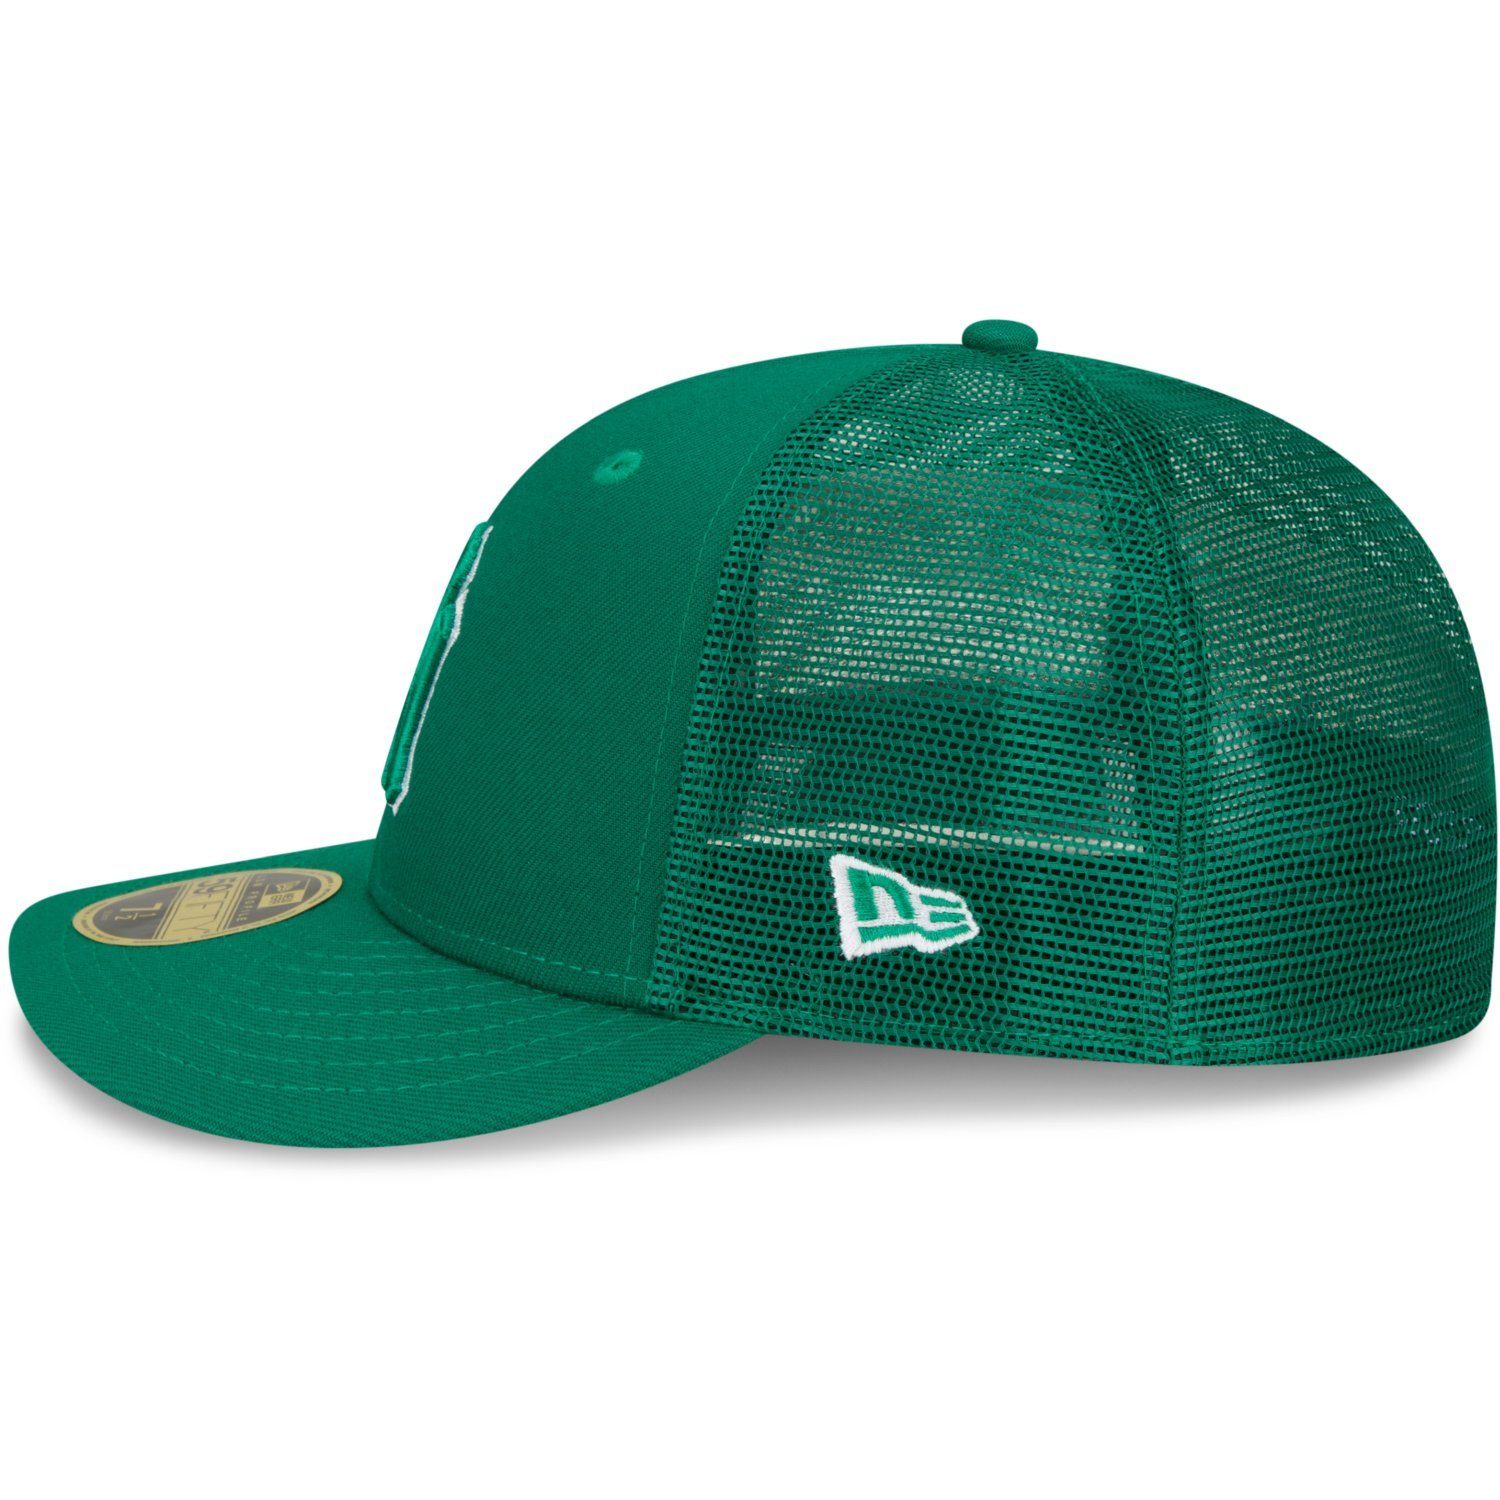 PATRICK’S York New Profile 59Fifty Low Cap DAY ST. Era New Fitted